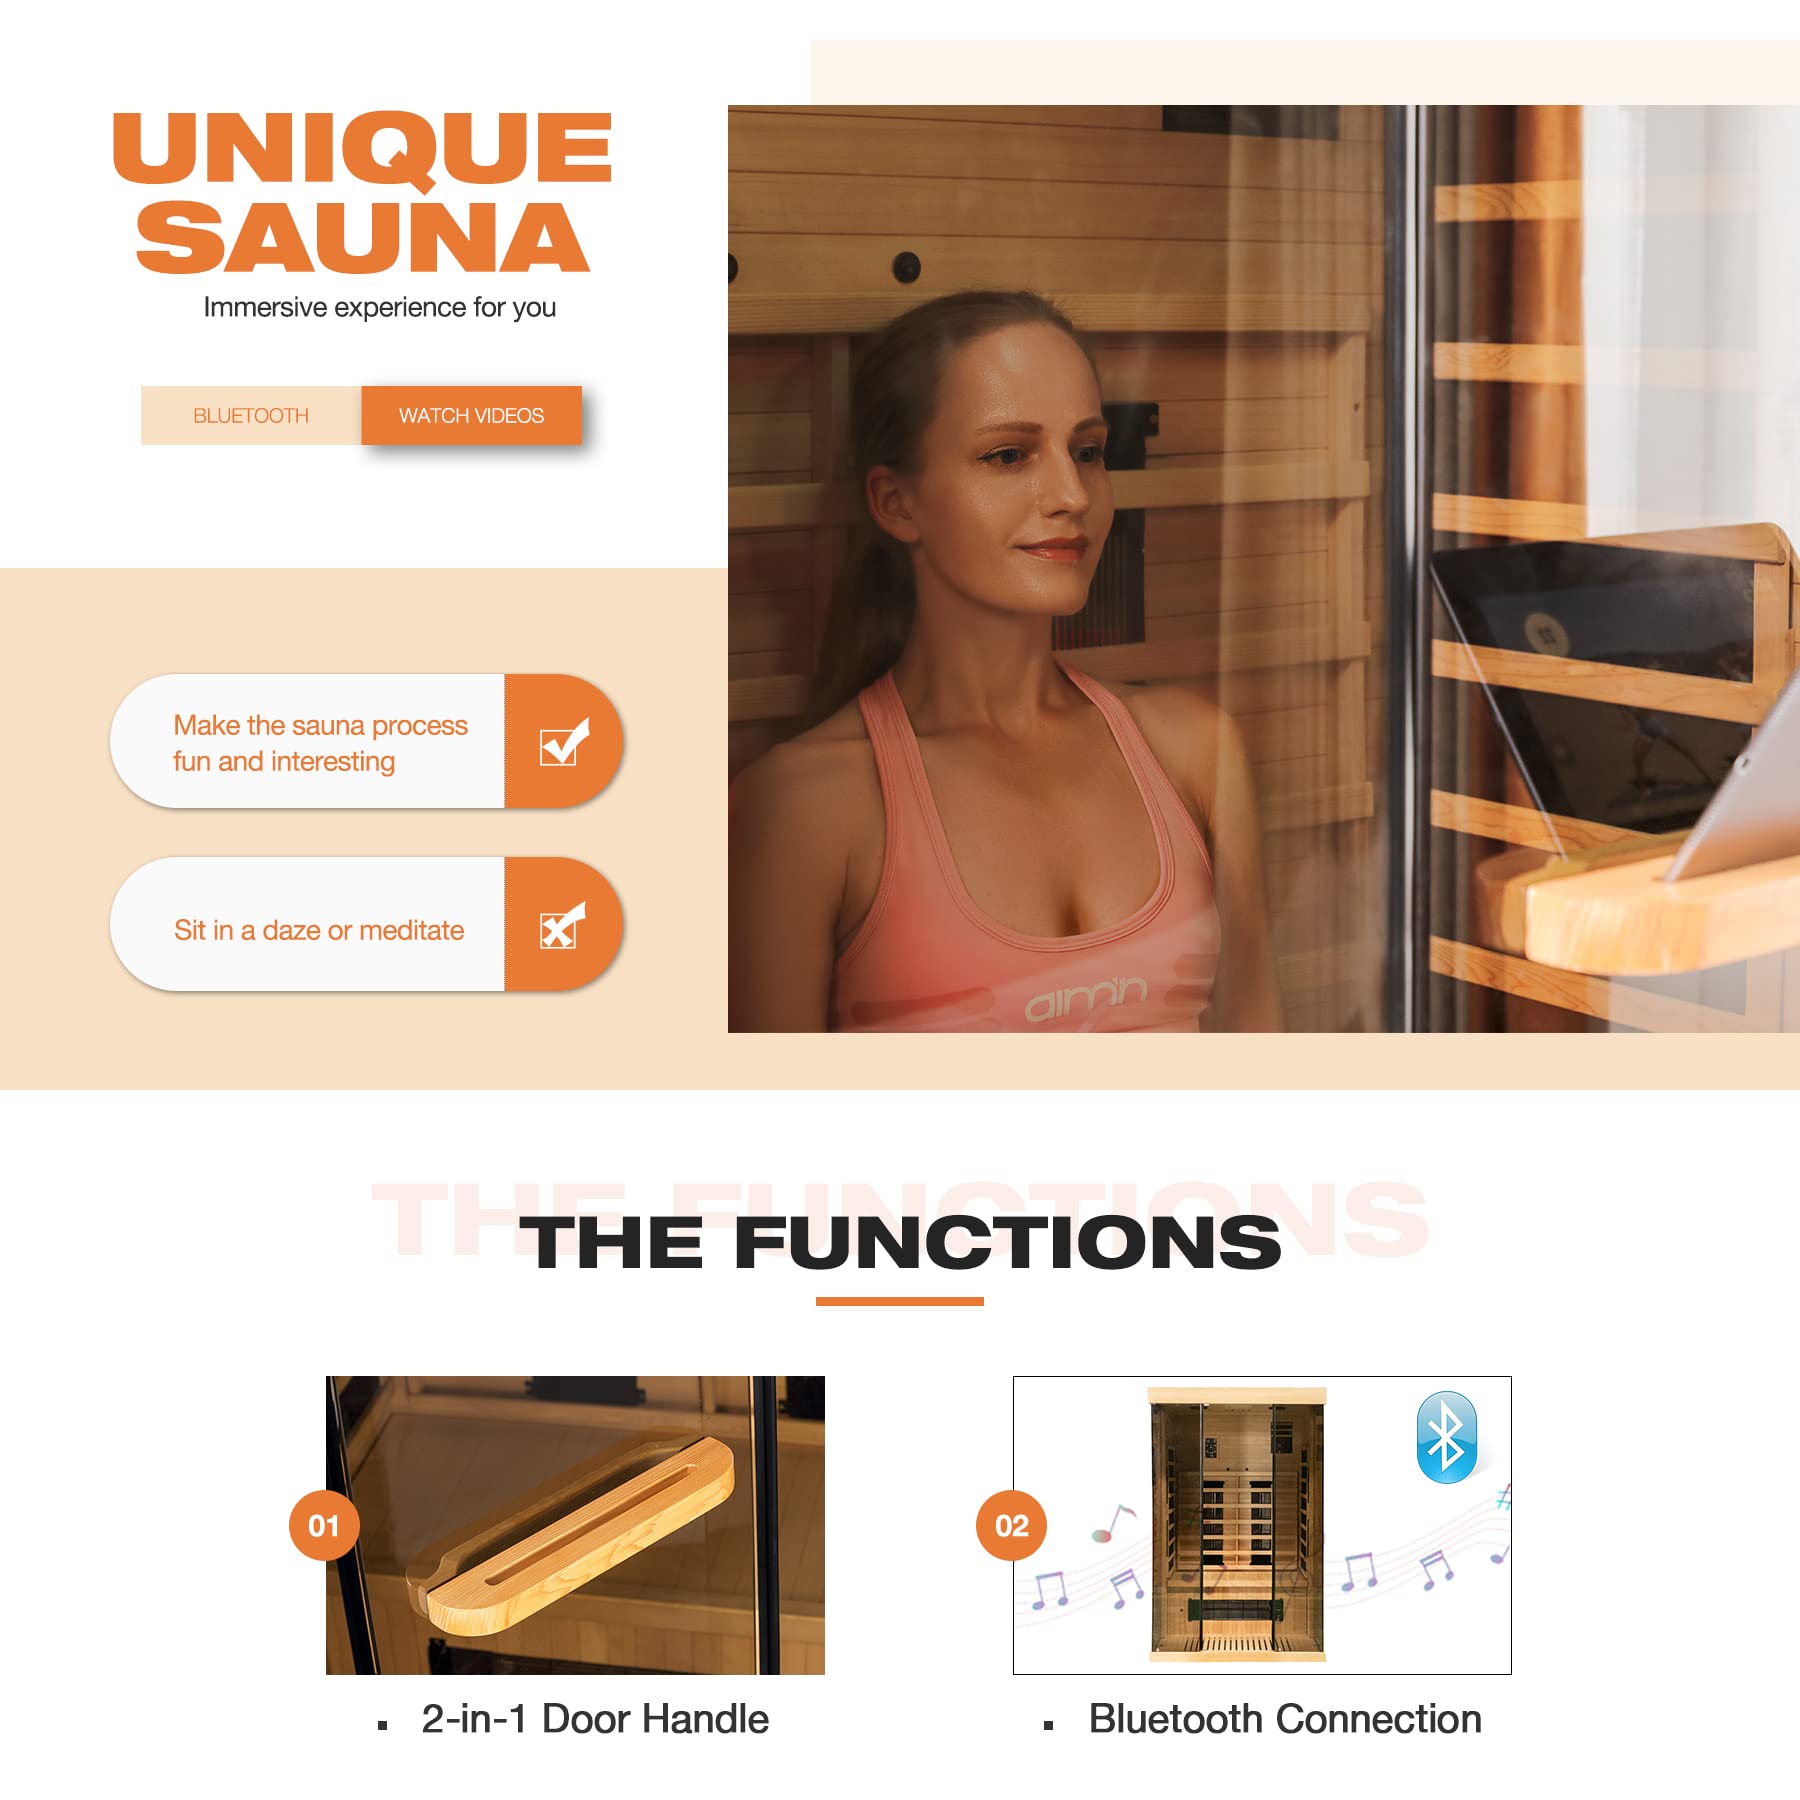 BNEHS Infrared Sauna, 1-2 Person Home Sauna with 10 Minutes Warm-up Heater Tube& Carbon Panels, Personal Sauna for Home with Door Handle to Hold Cell Phones and IPad, Panoramic Tempered Glass